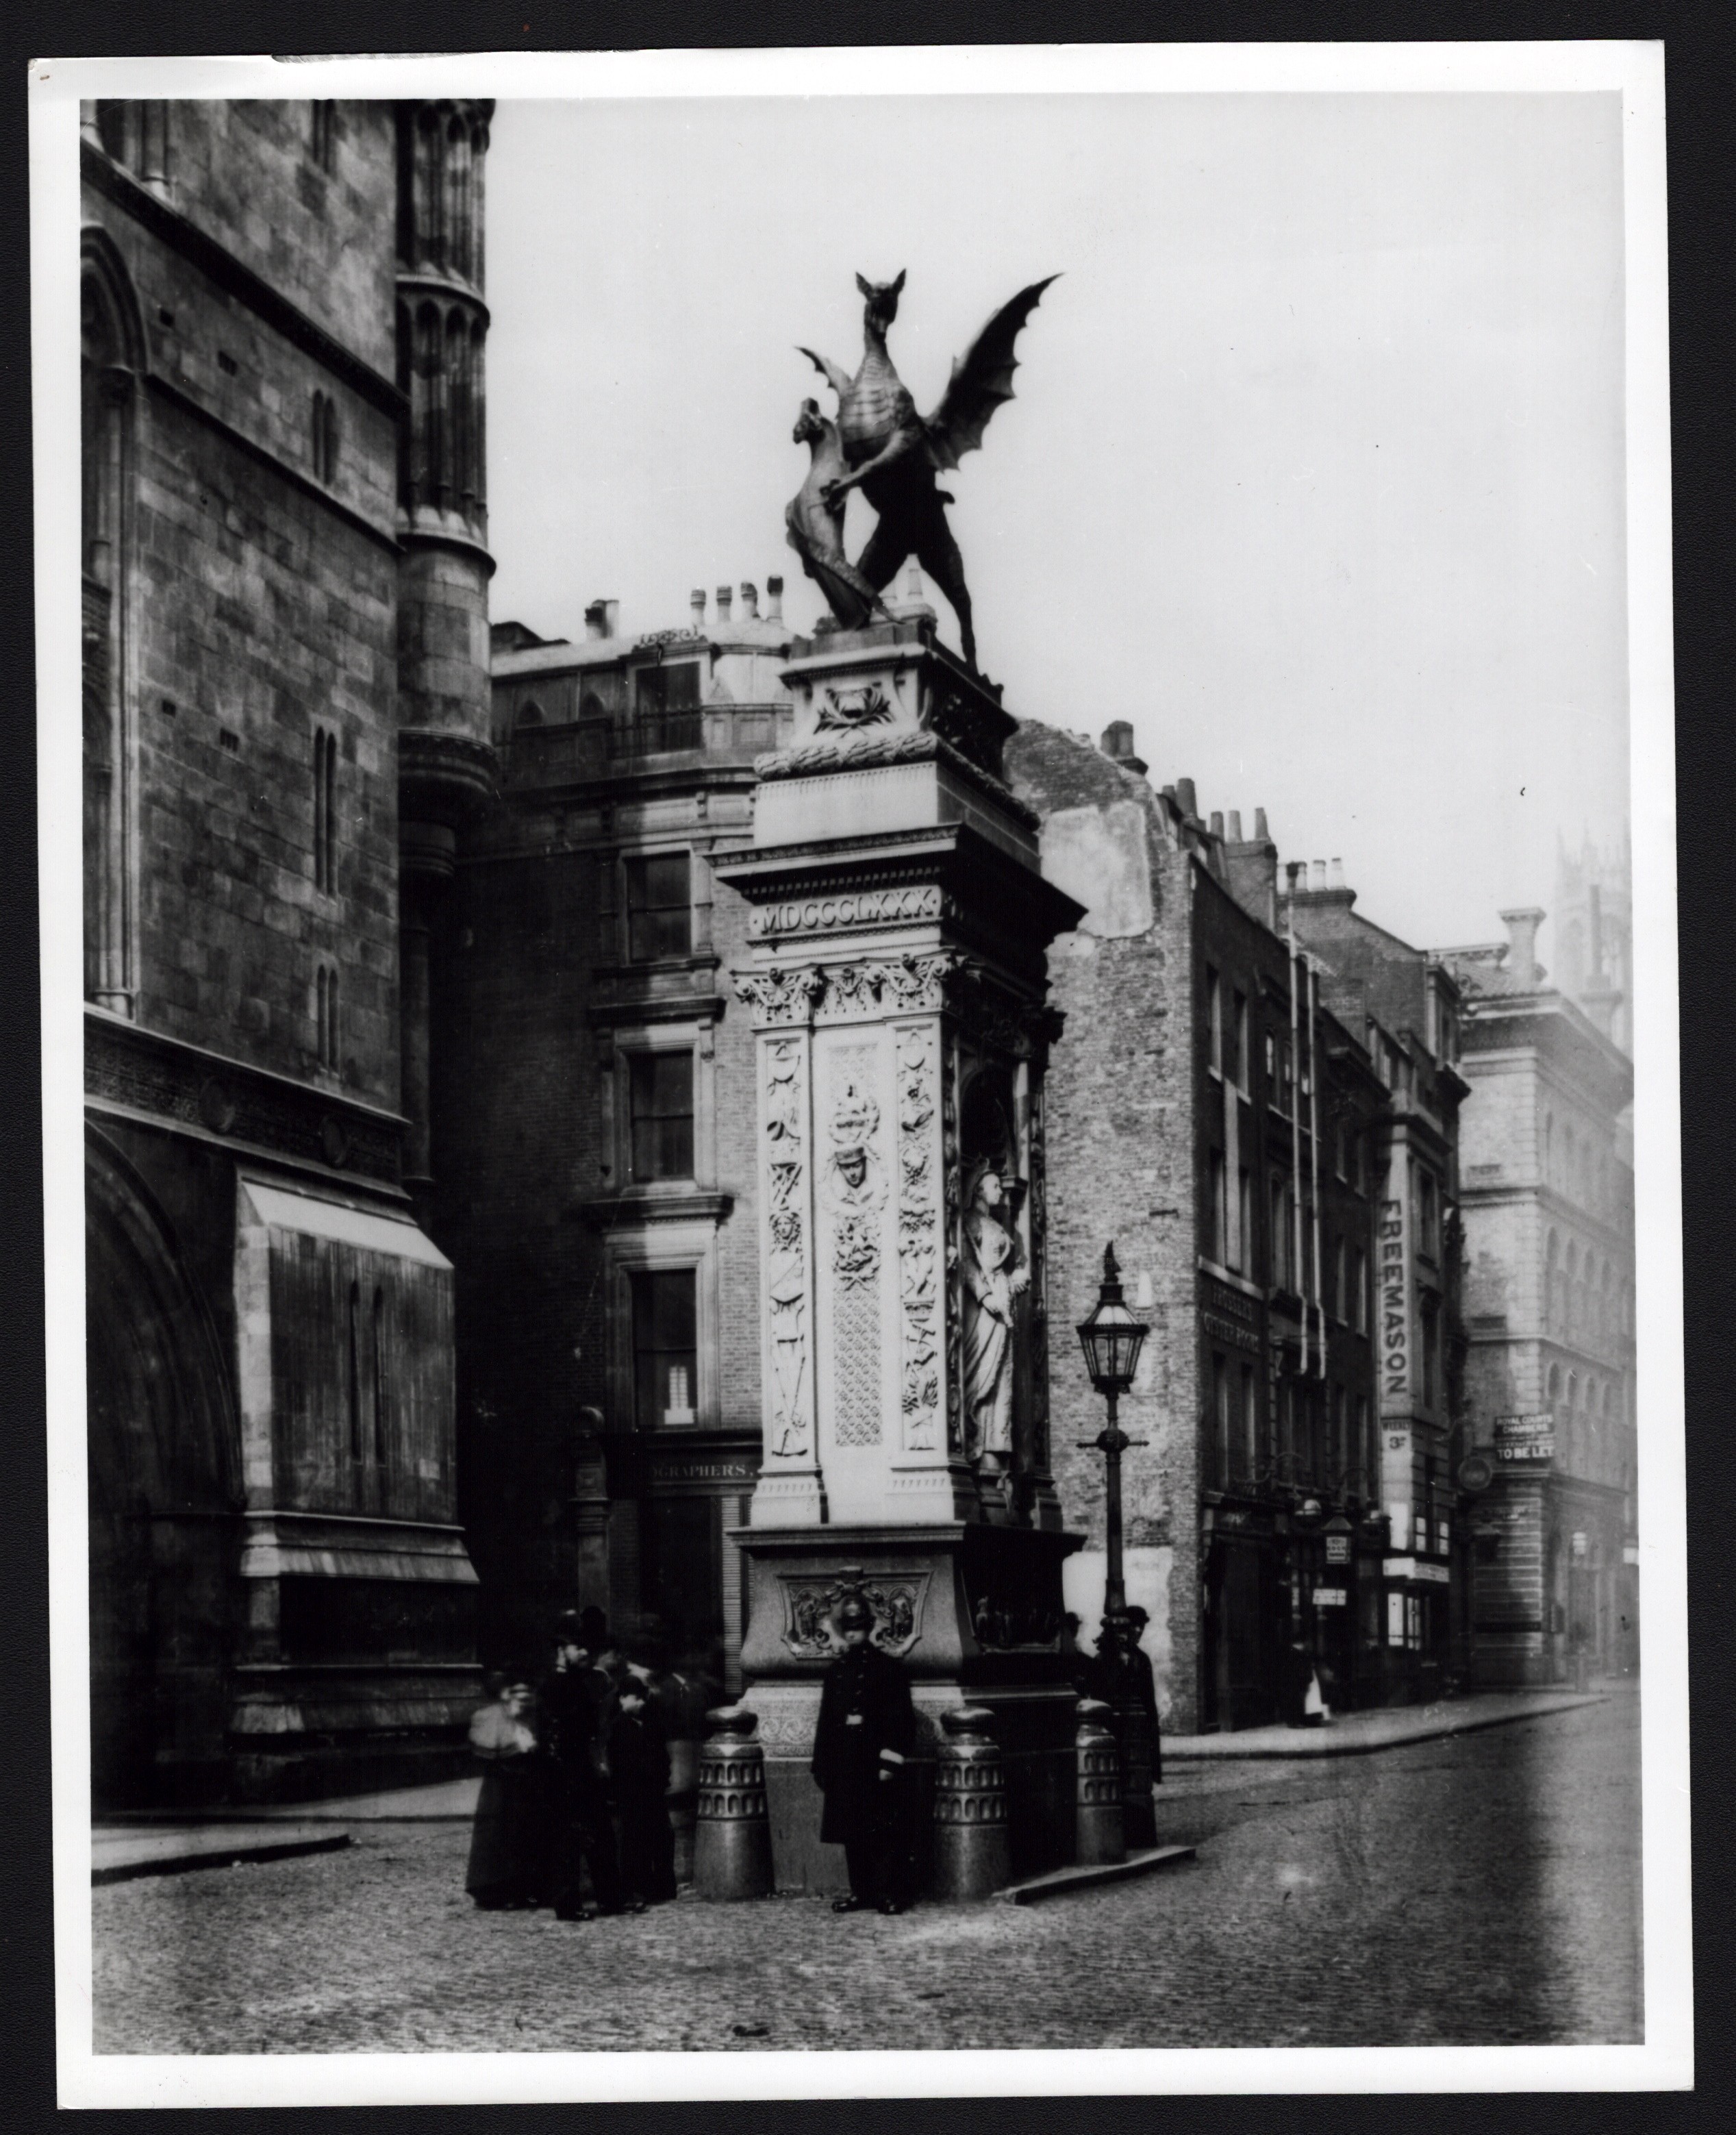 PRESS PHOTOGRAPH TEMPLE BAR MEMORIAL DRAGON FOR THE GUILDHALL LIBRARY